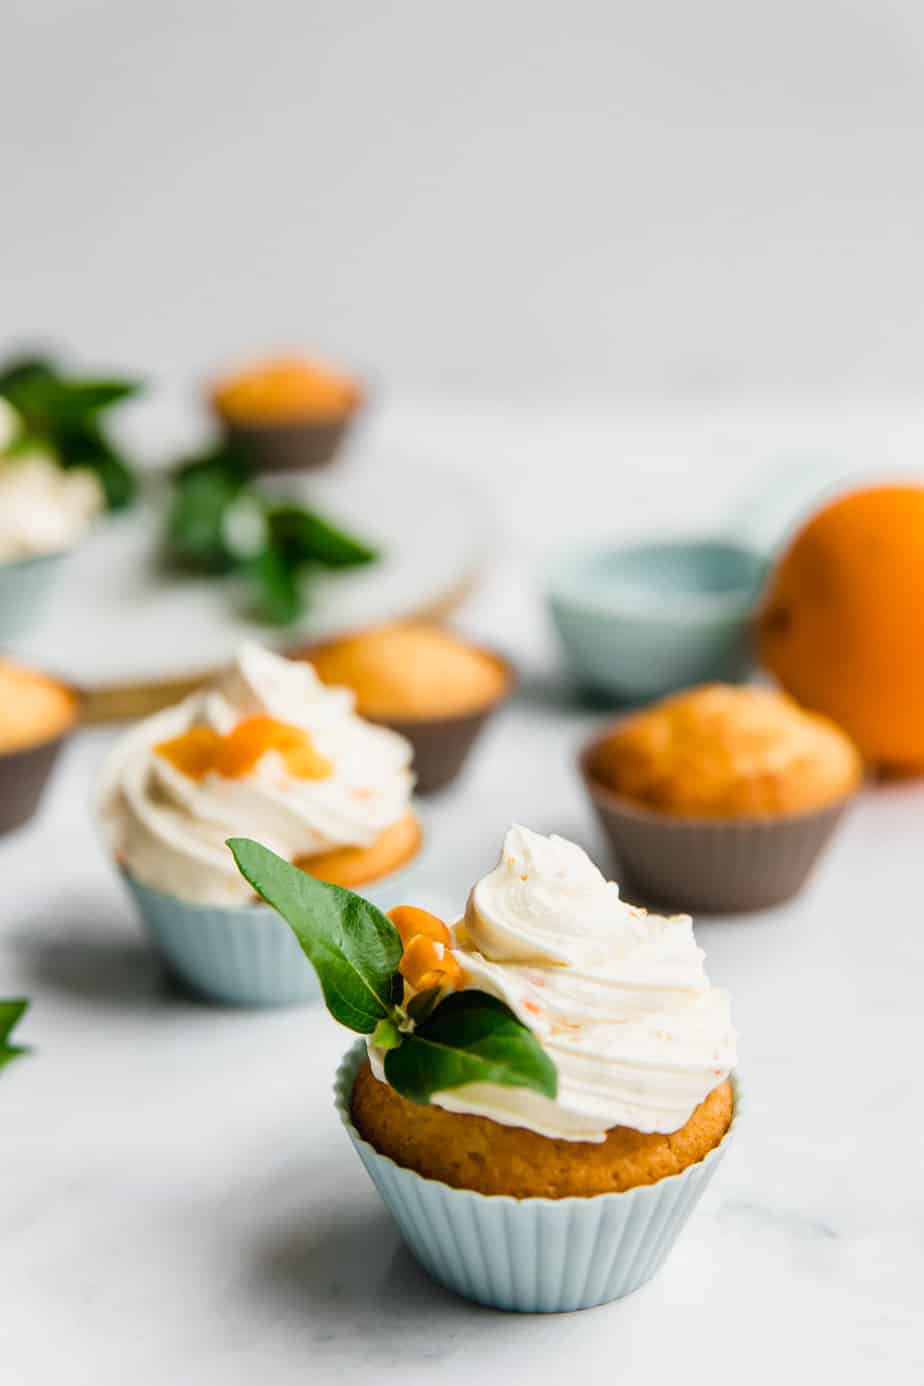 A cupcake with piped frosting and orange zest.